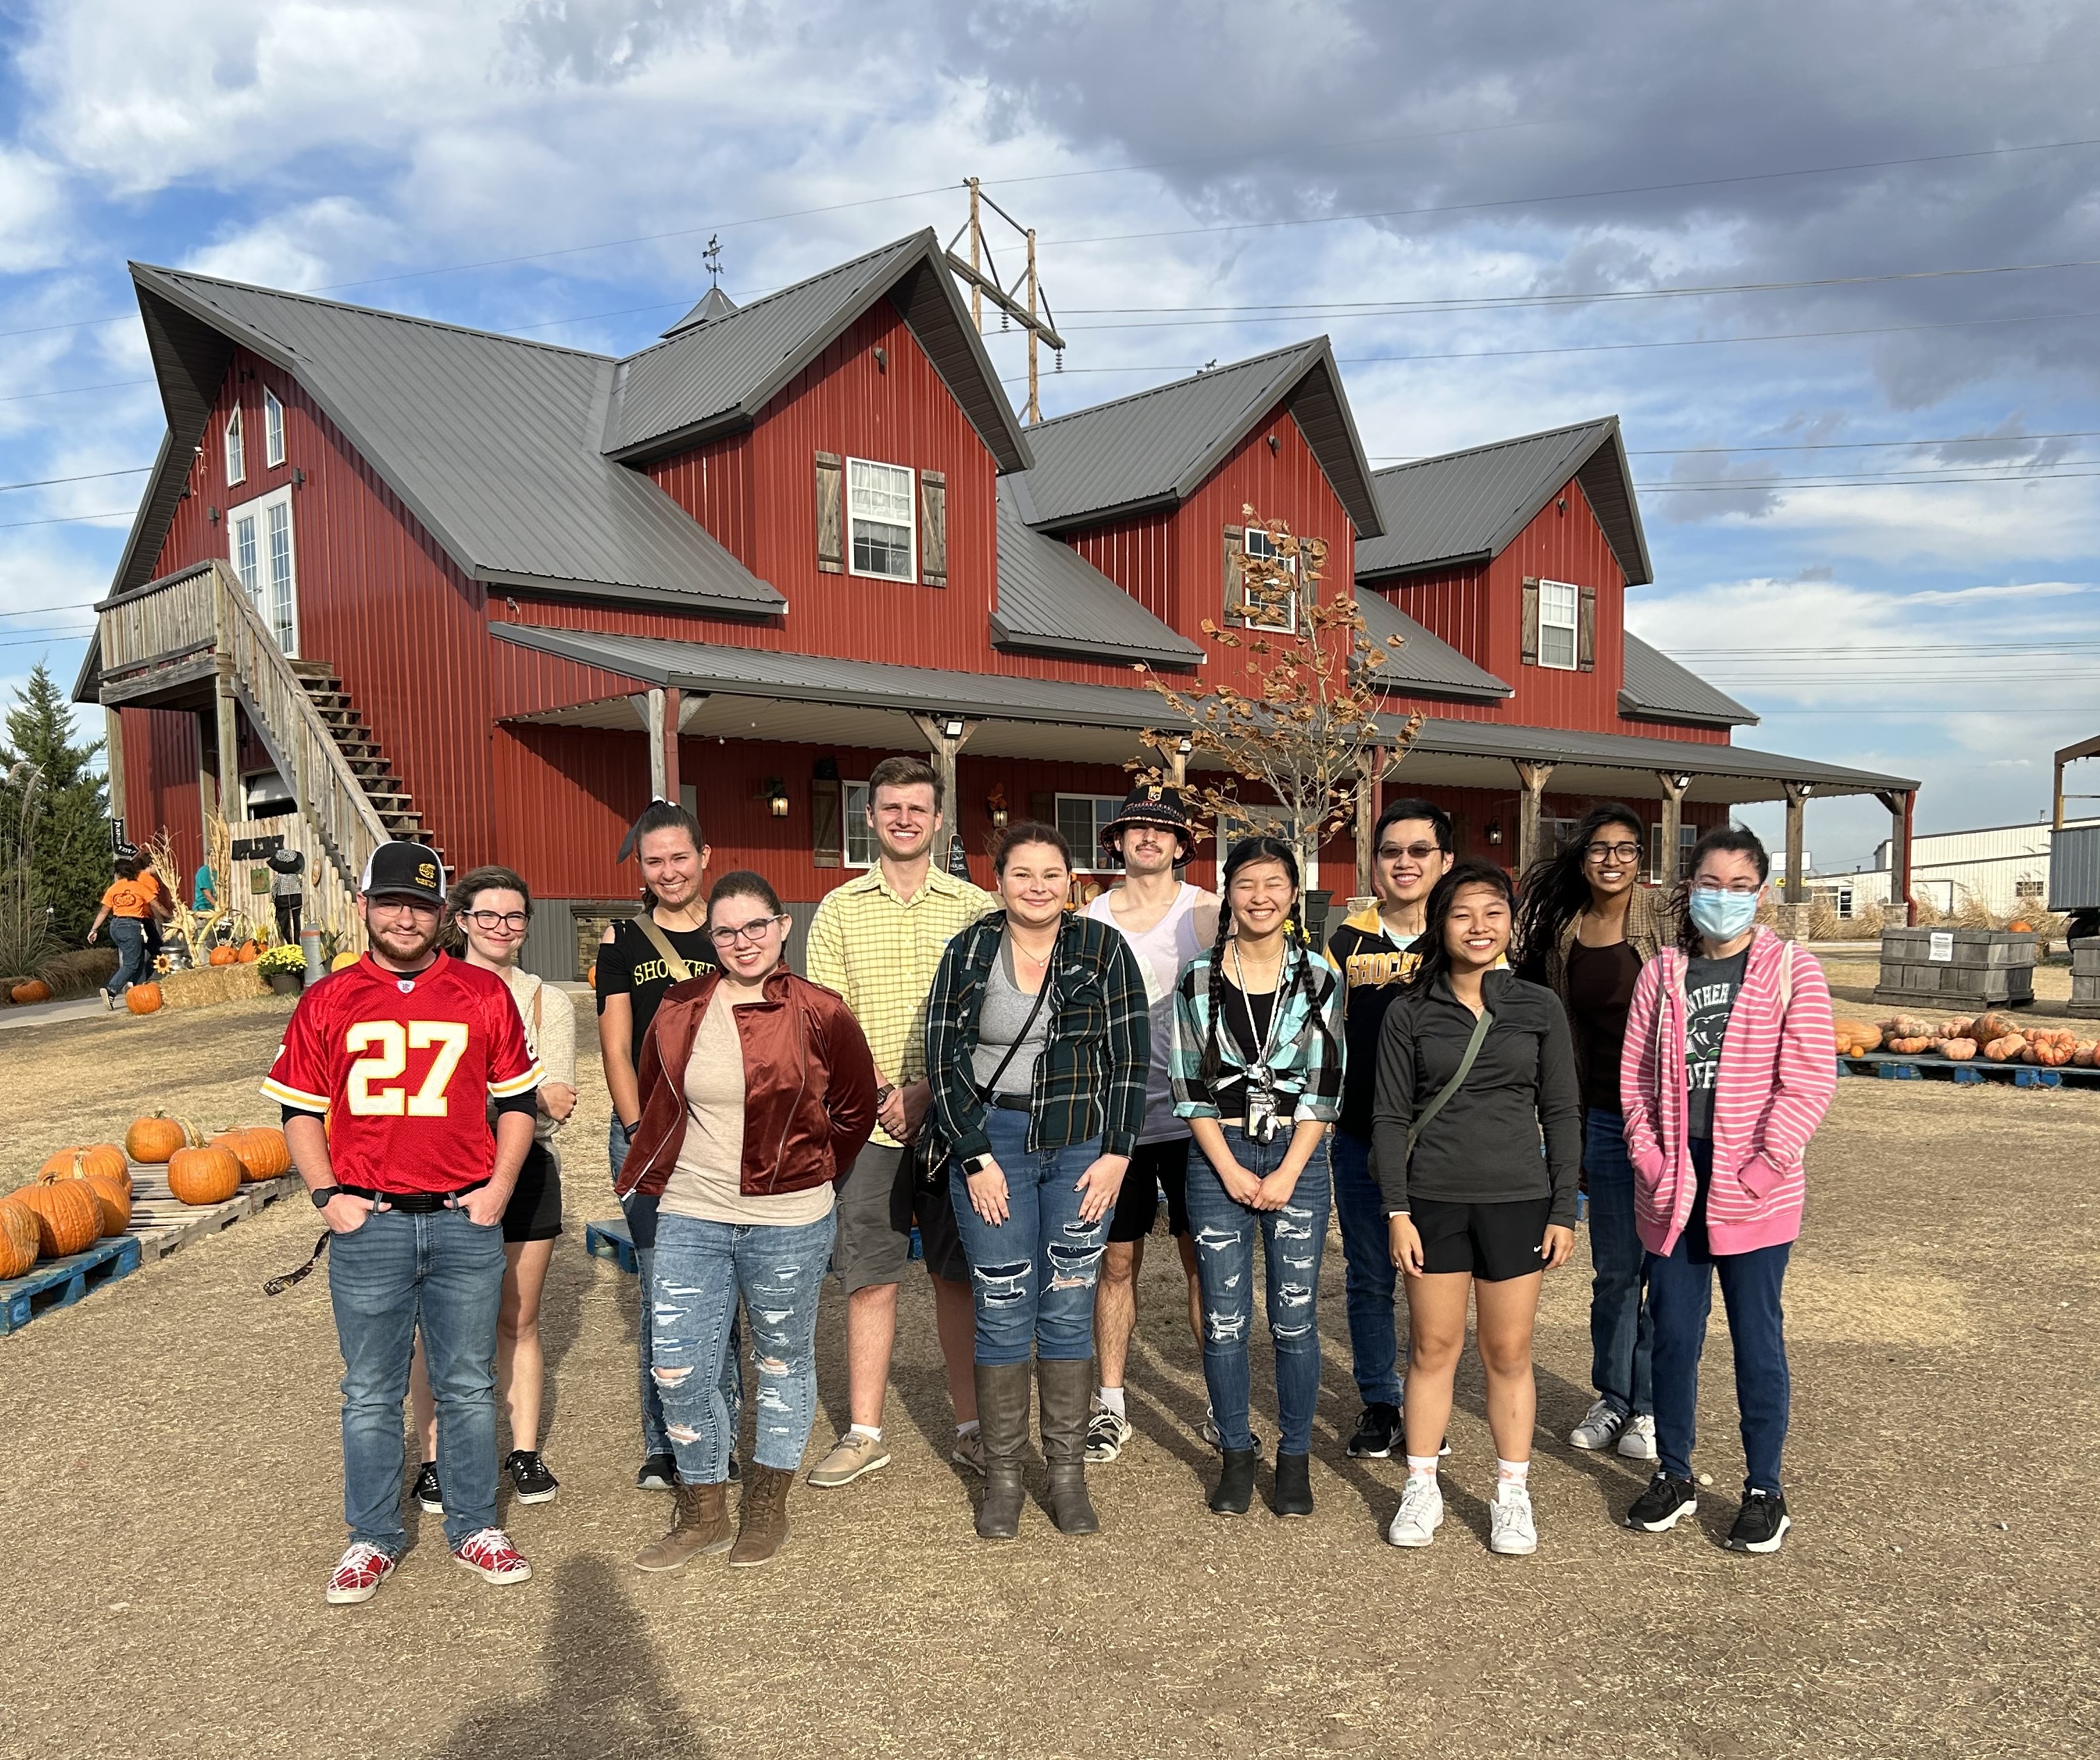 Students standing in a group with a barn in the background